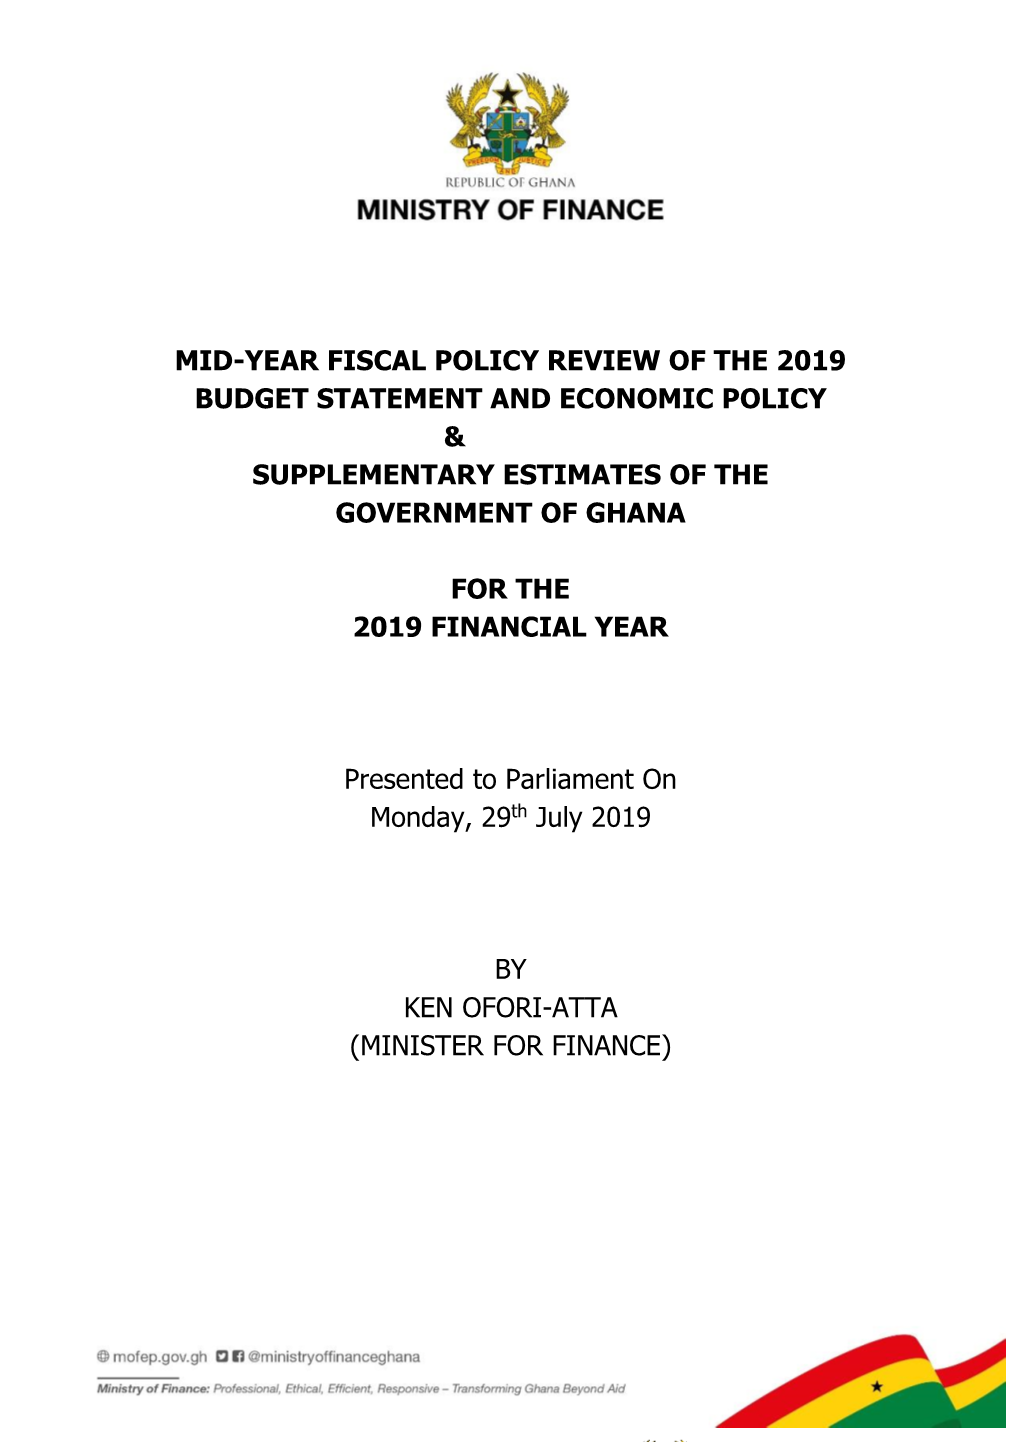 Mid-Year Fiscal Policy Review of the 2019 Budget Statement and Economic Policy & Supplementary Estimates of the Government of Ghana